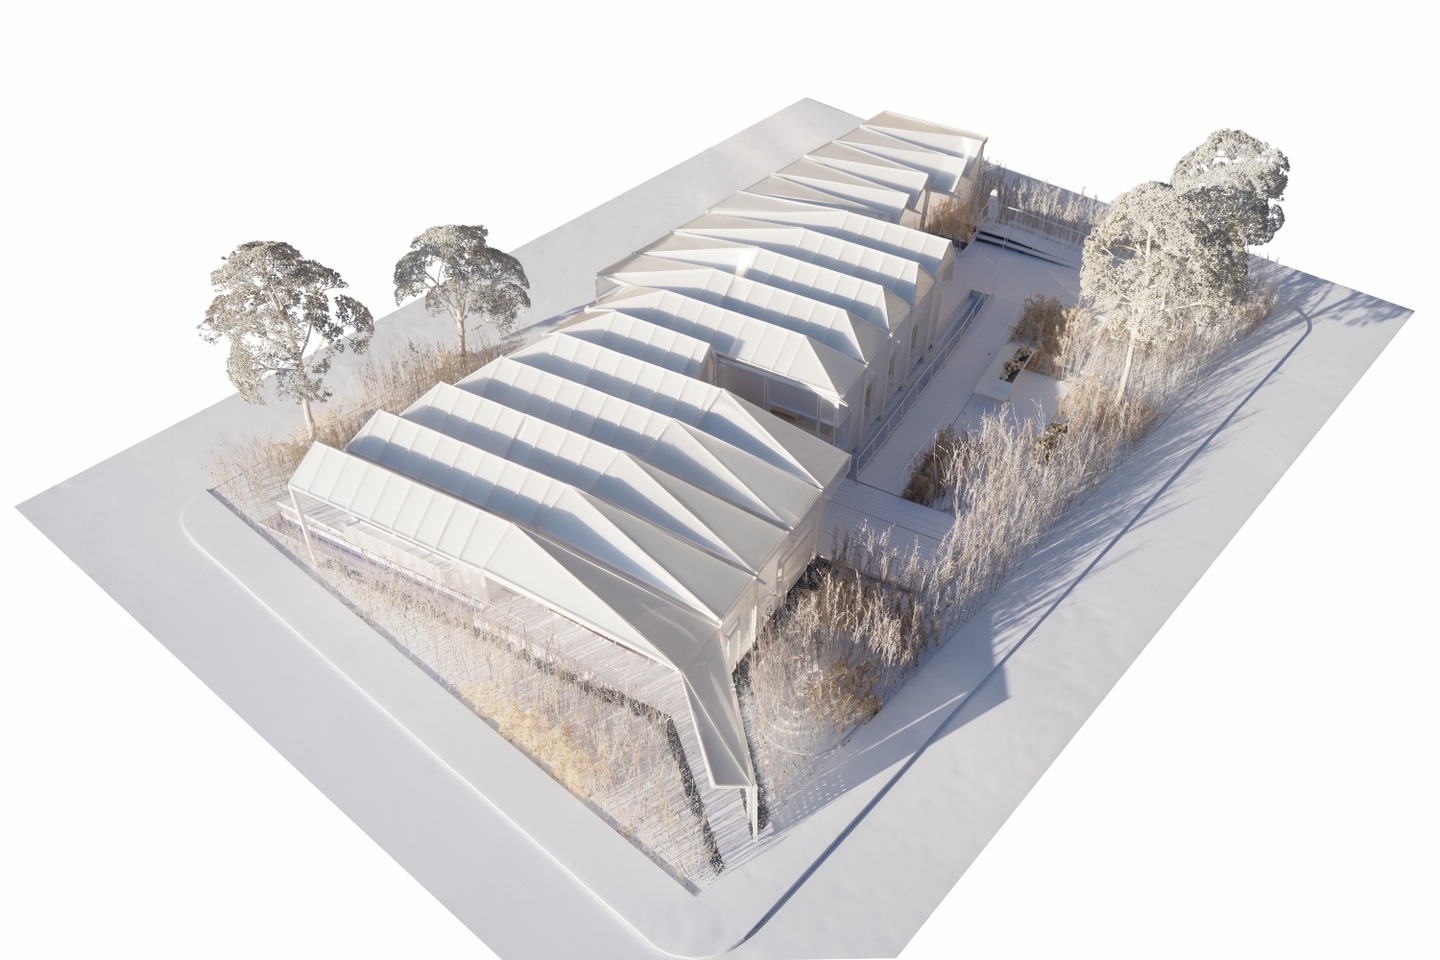 3D birds eye view rendering of a wide building of two to three floors with a zig zagged irregular roof design